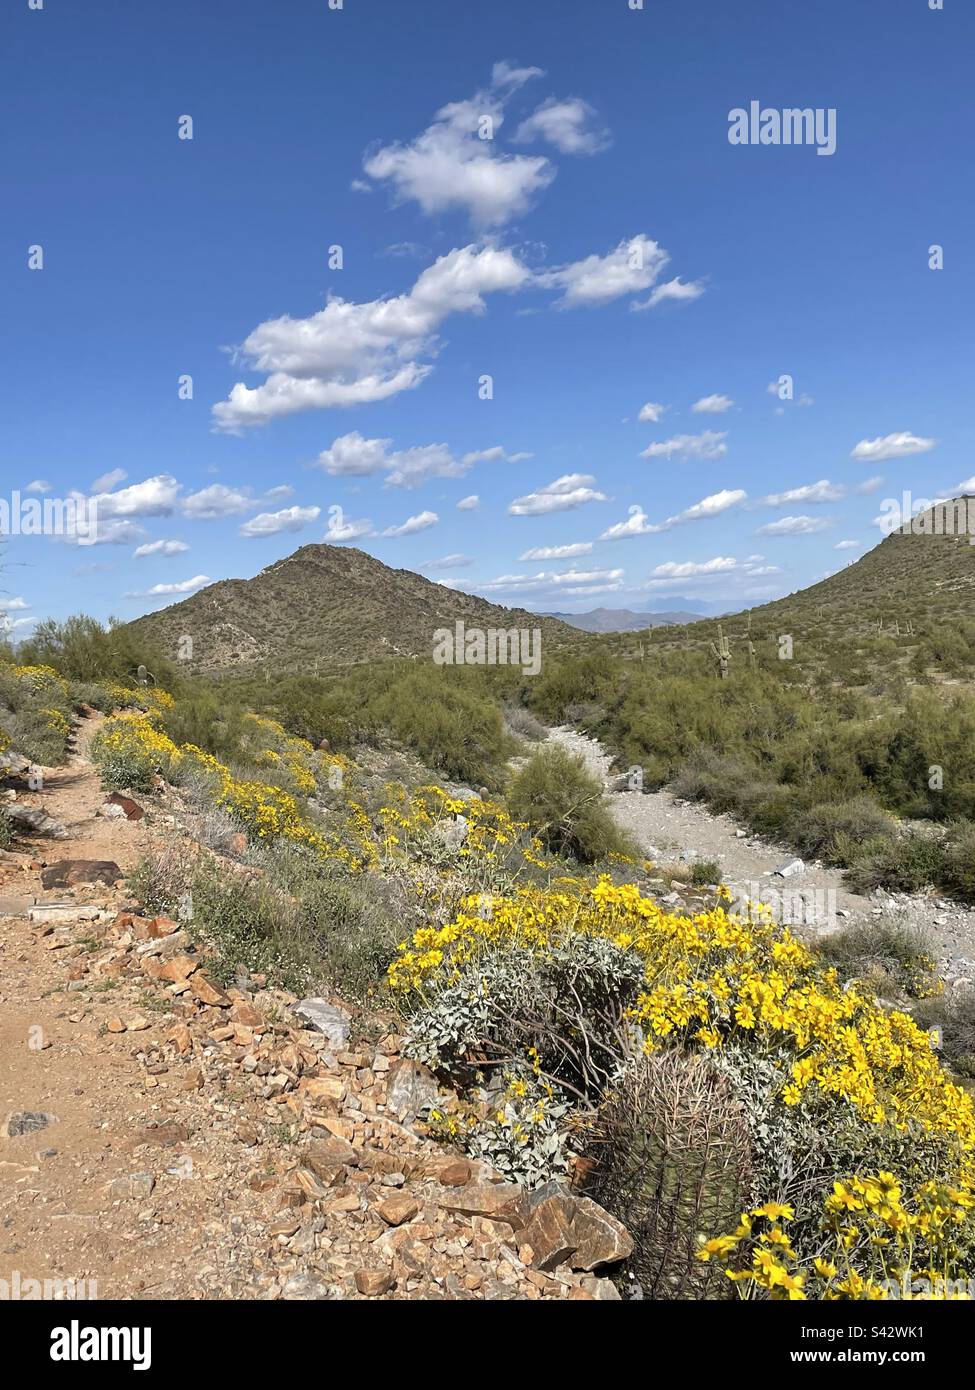 Barrel cactus, trail and desert wash flanked by brilliant yellow brittle bushes, fluffy clouds in bright blue sky over mountain peak, Phoenix Mountains Preserve, Dreamy Draw, 40th street trailhead, AZ Stock Photo